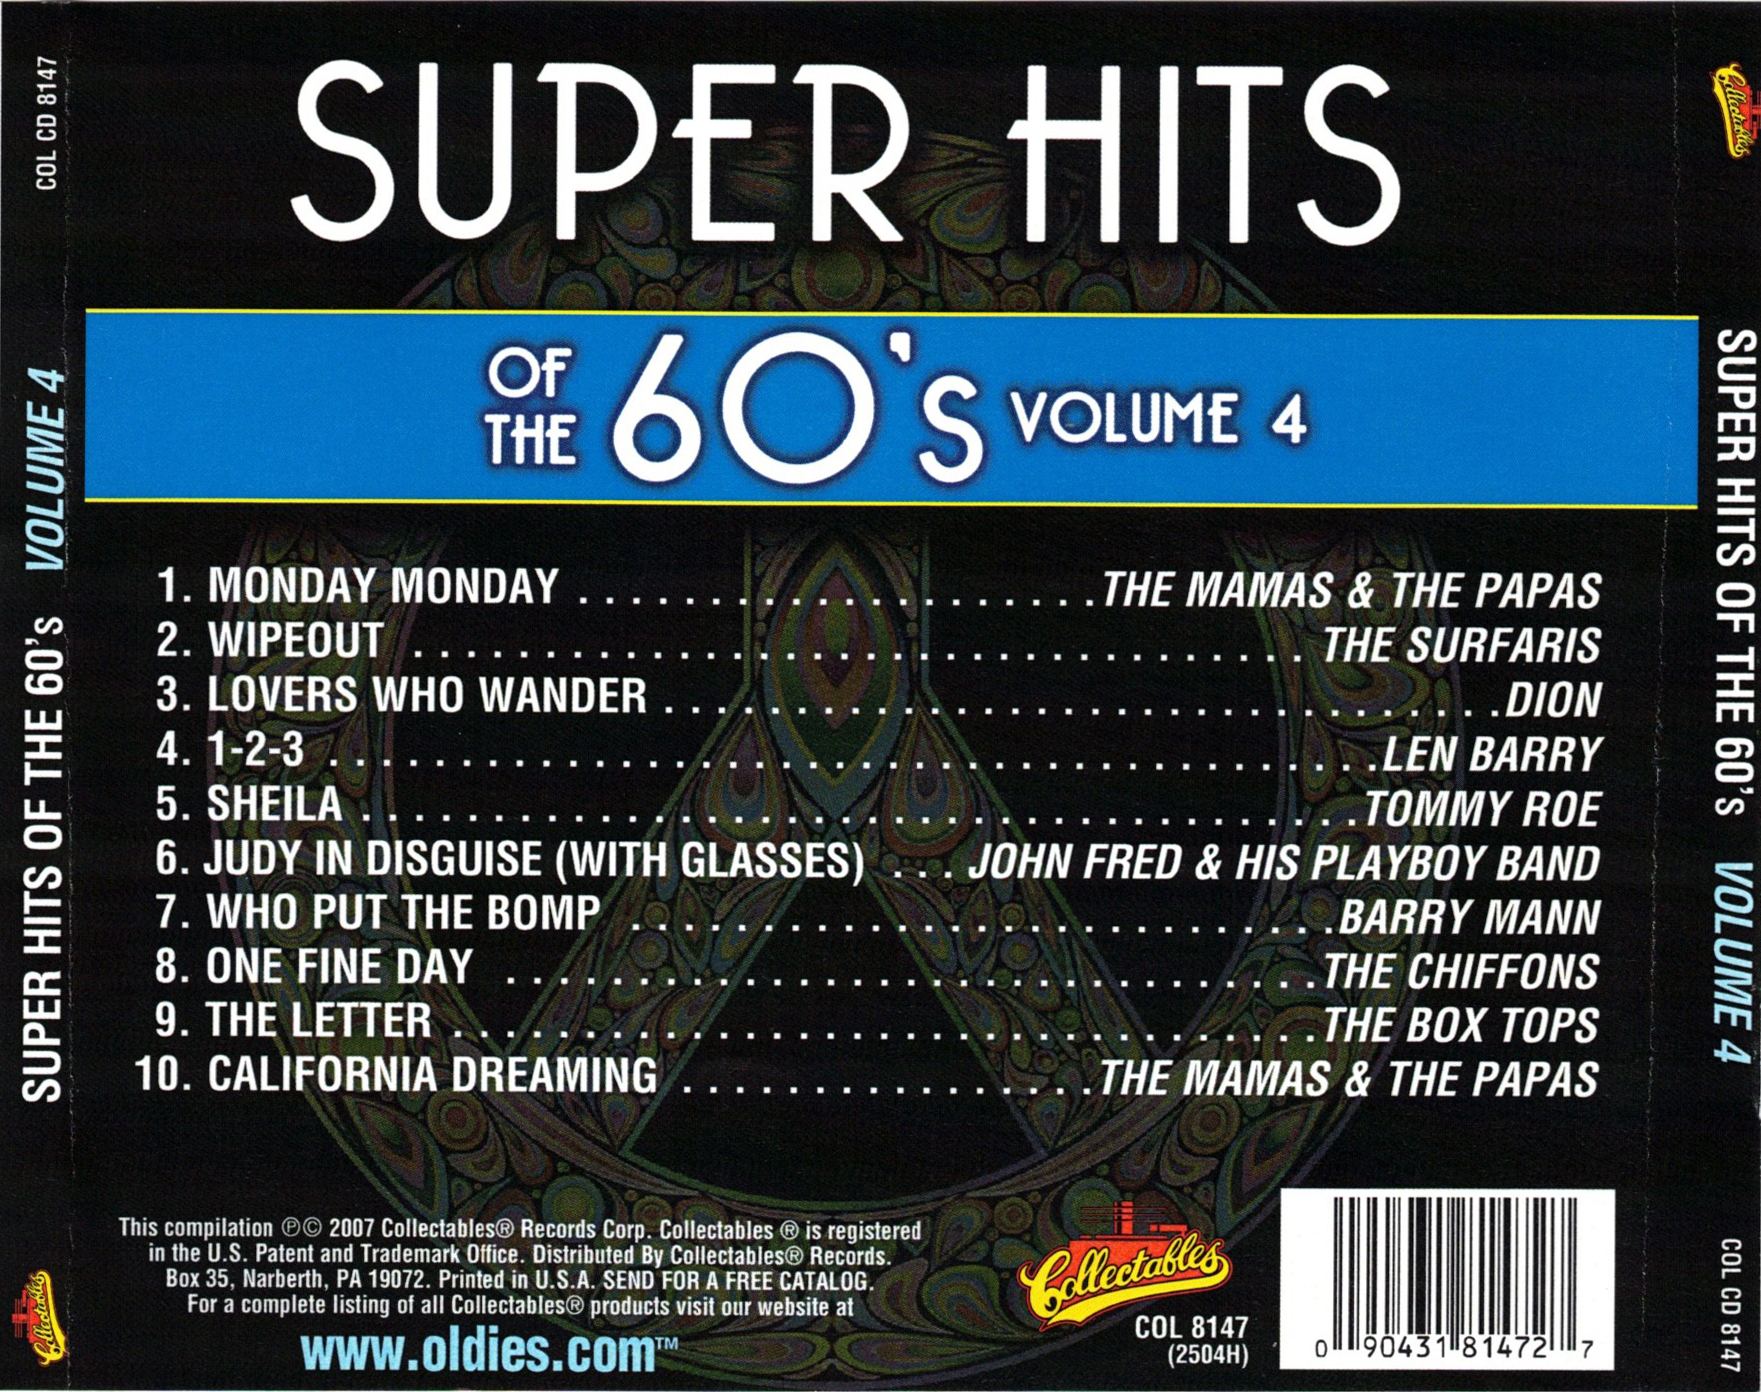 Super Hits Of The 60's, Volume 4 - Click Image to Close